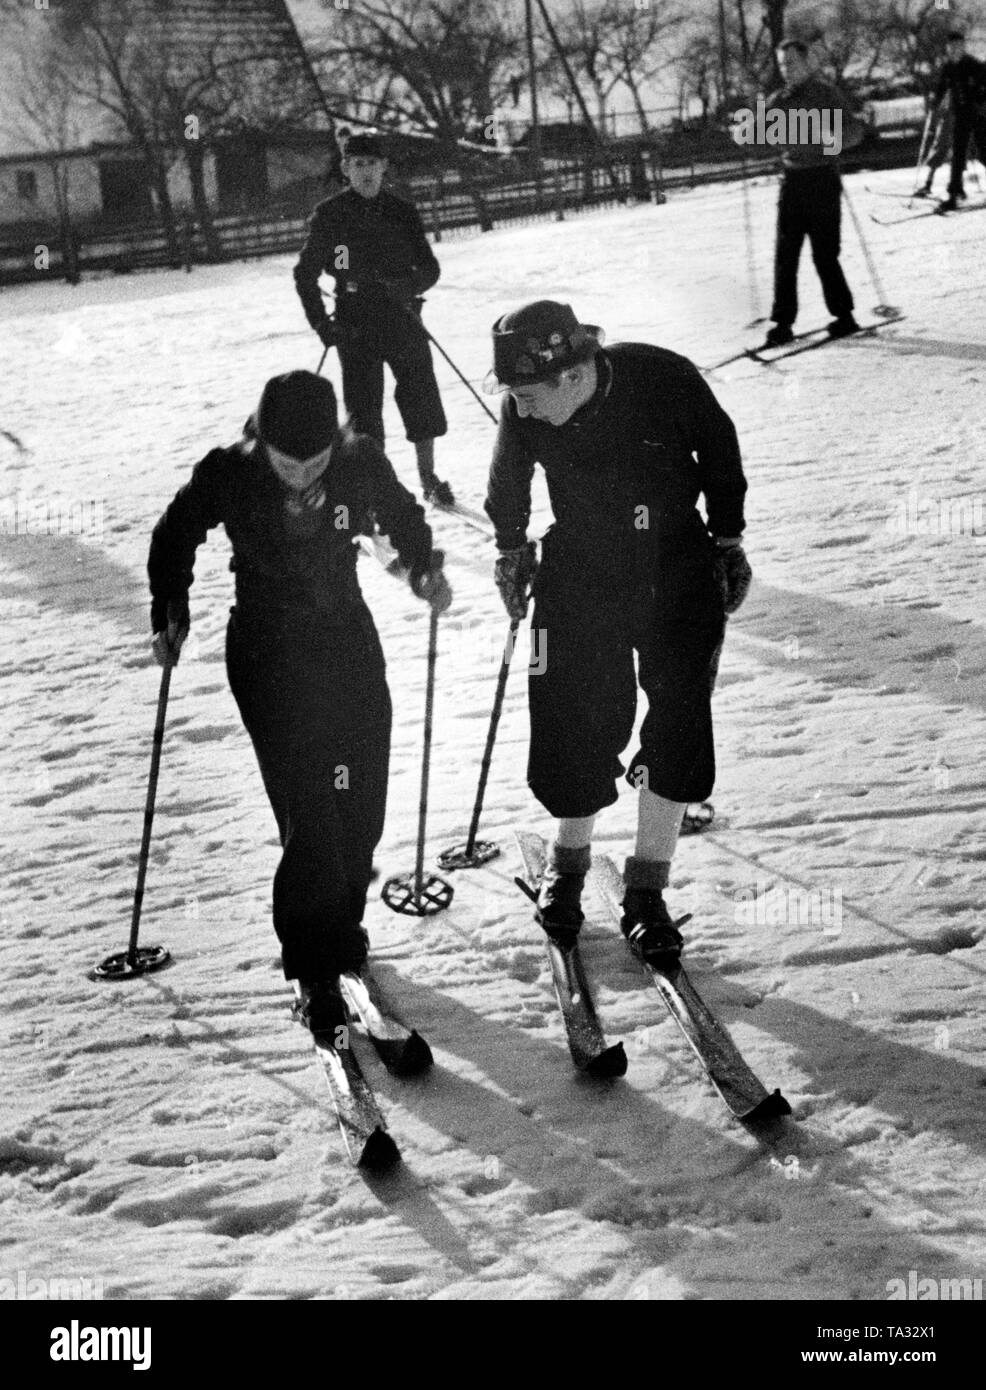 A ski instructor from the sports office teaches a student during a ski course of the Nazi organization 'Kraft durch Freude' ('Strength through Joy') in Agnetendorf (Jagniatkow) in the Krkonose. Stock Photo